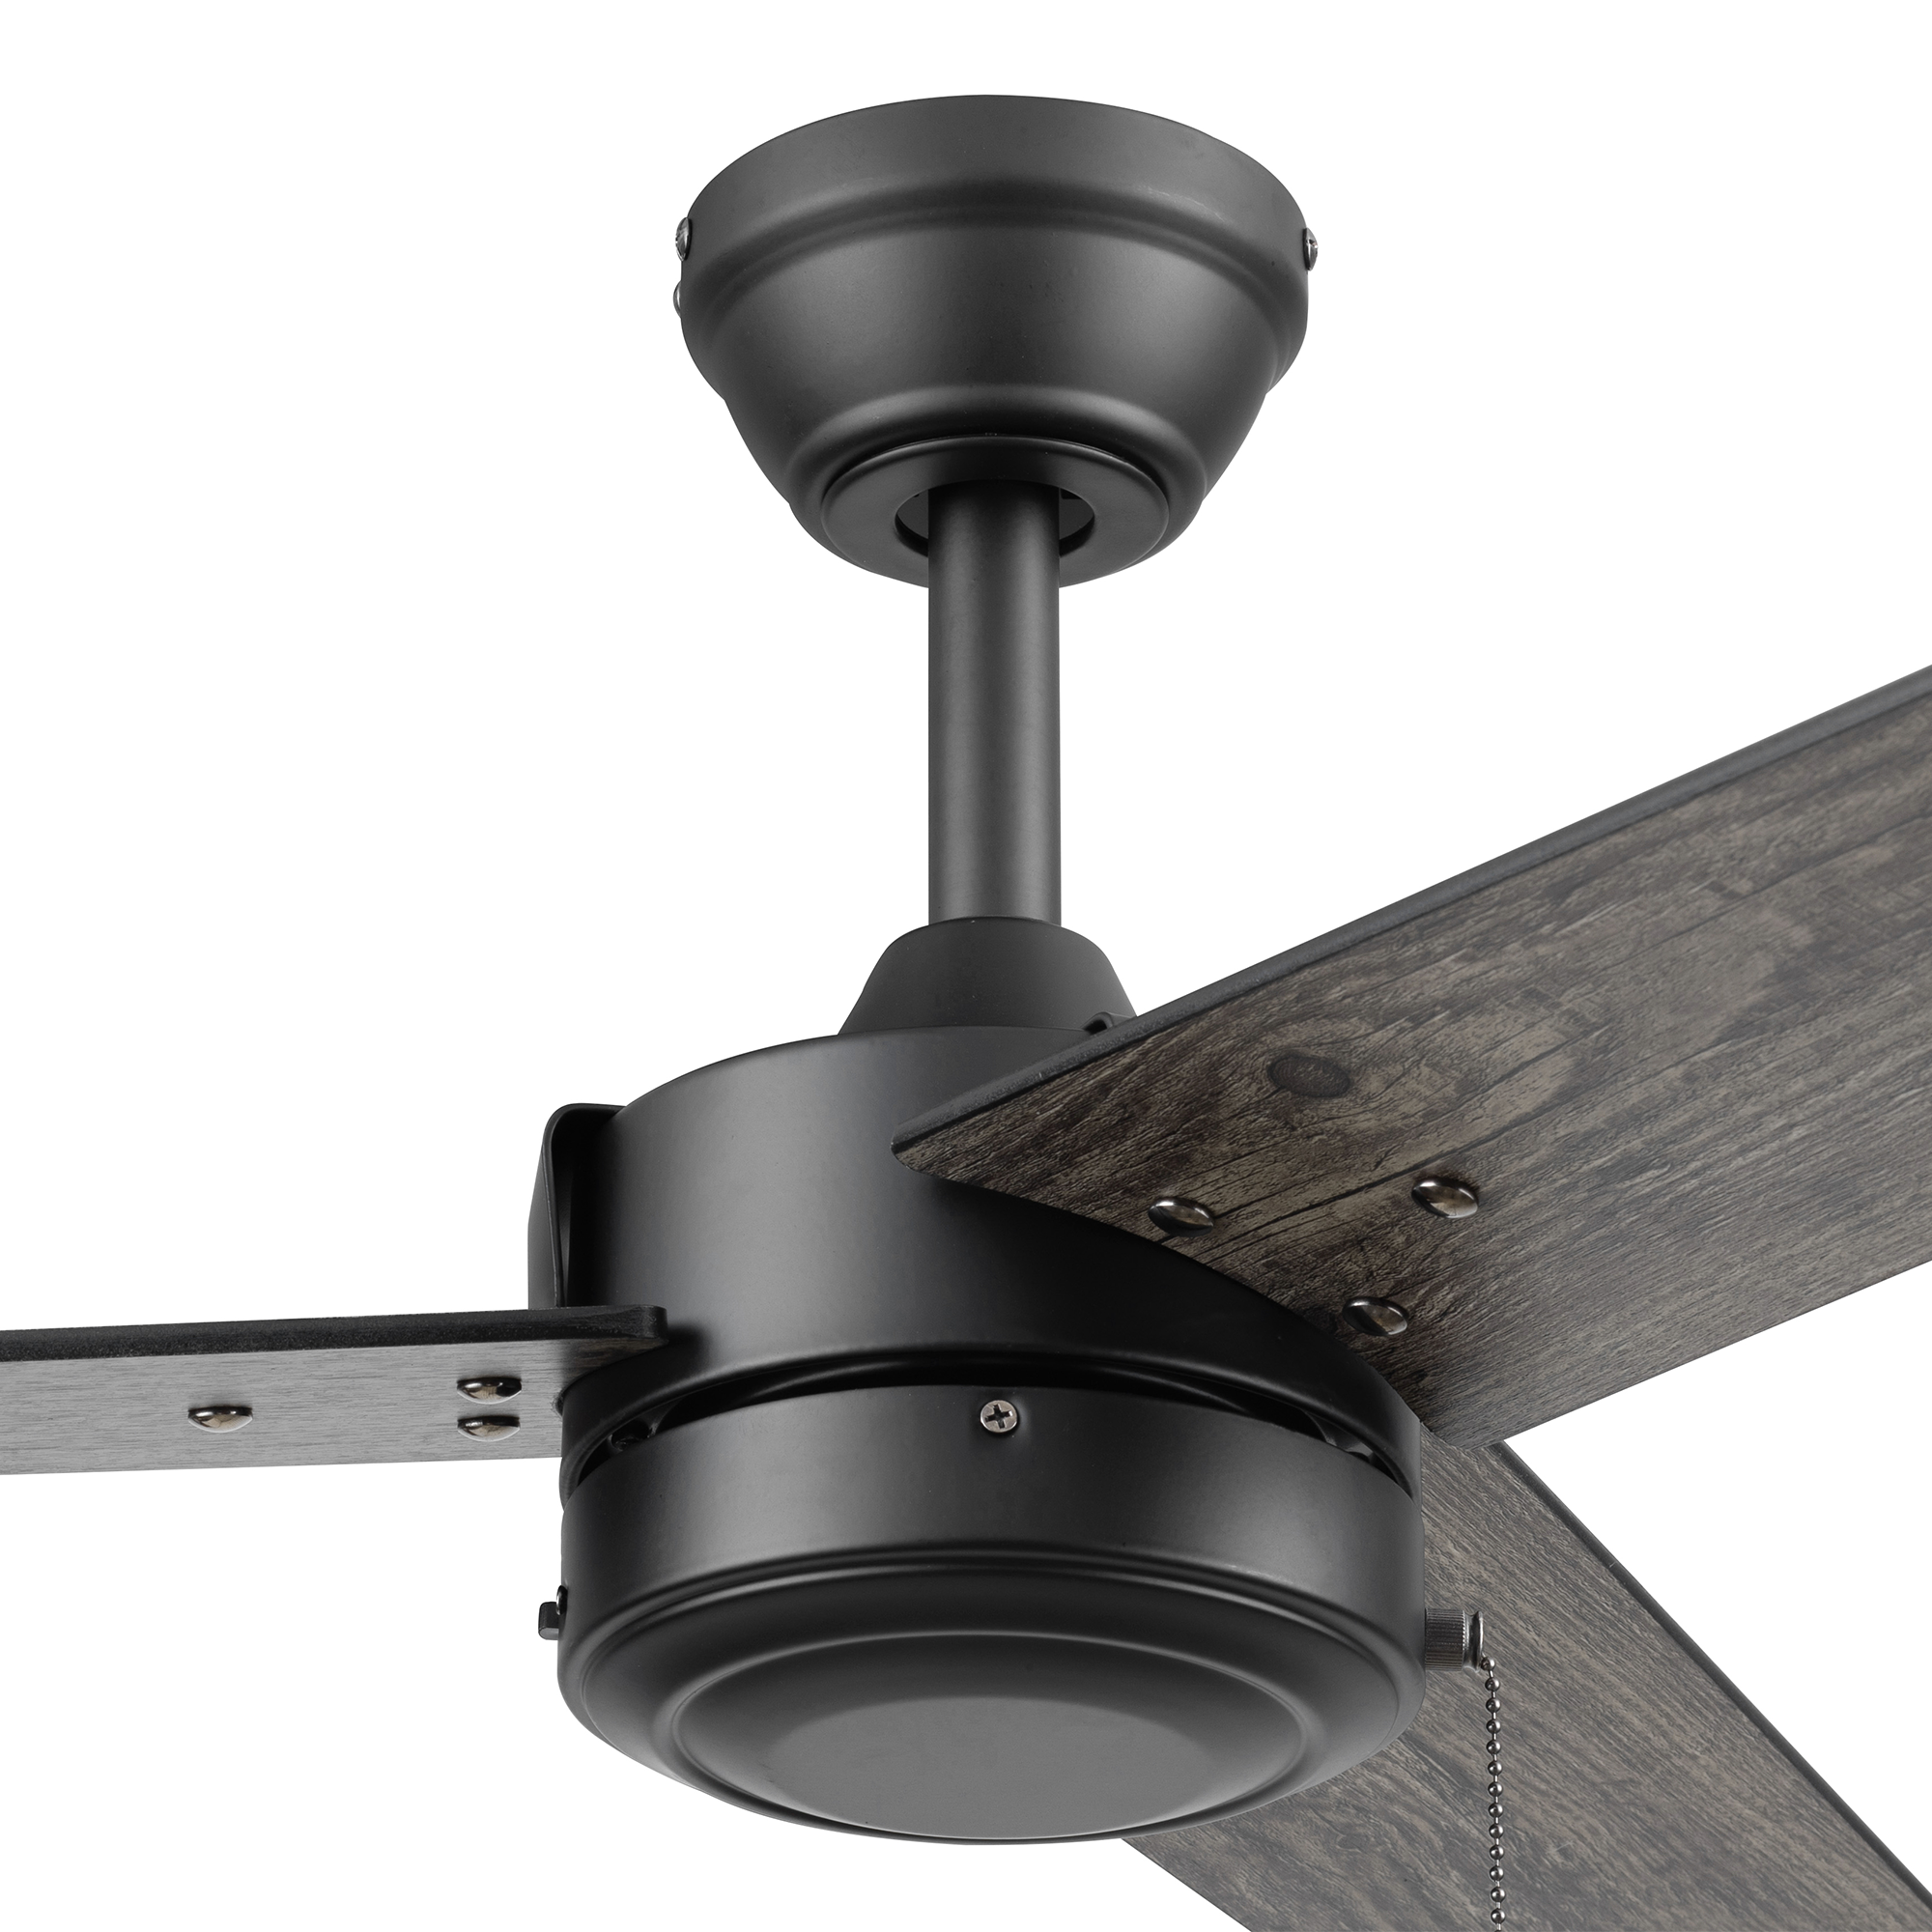 52 Inch Tenant, Matte Black, Pull Chain, Indoor/Outdoor Ceiling Fan by Prominence Home